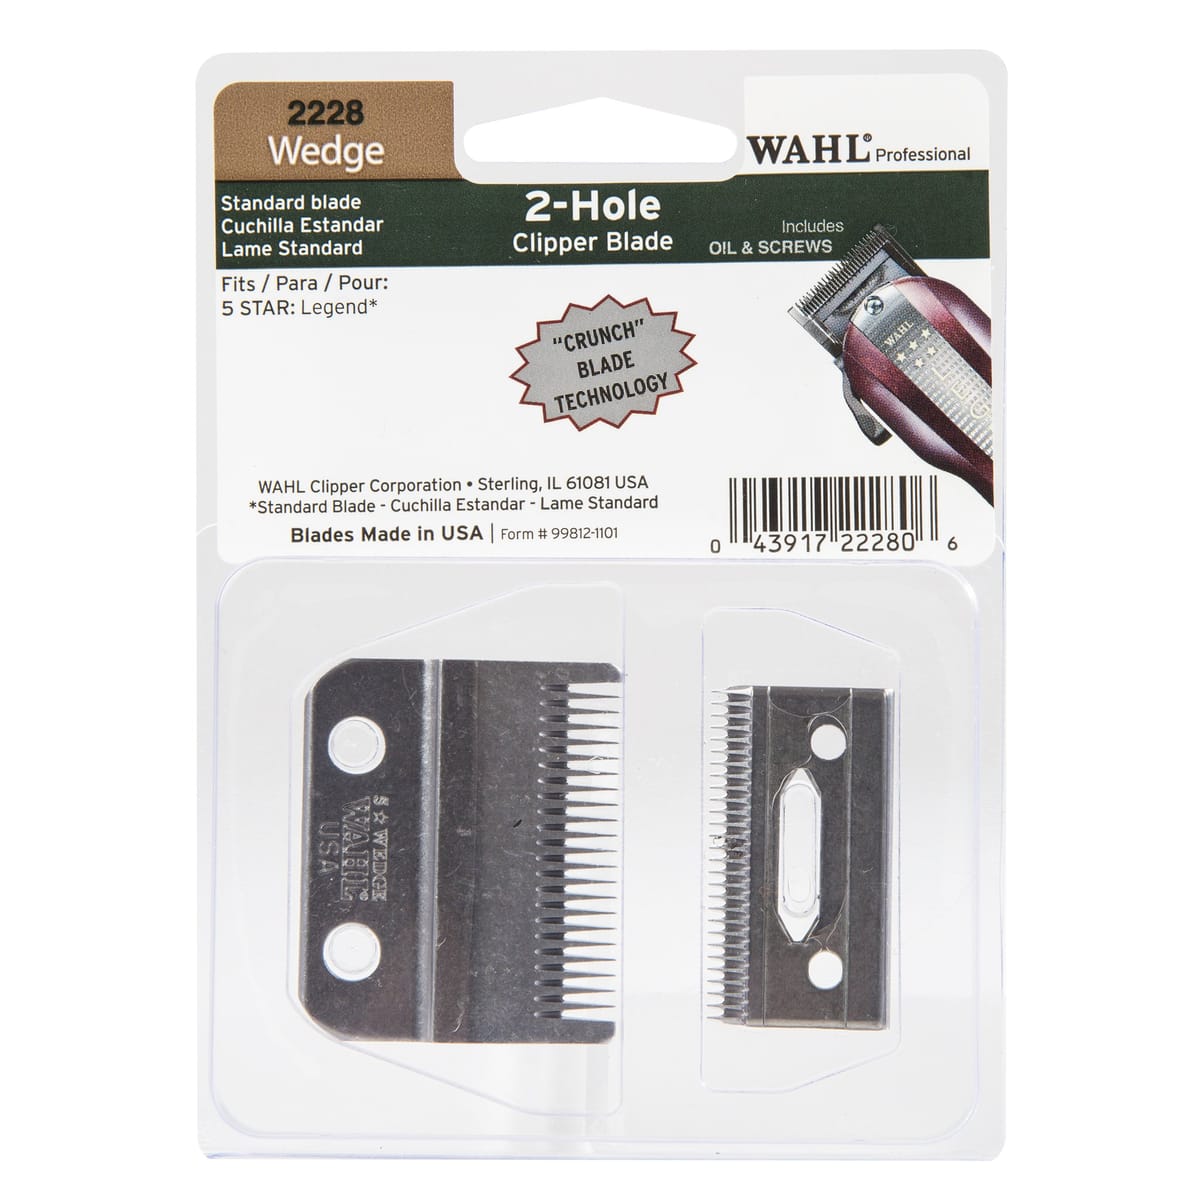 Wahl Professional Wedge 2 Hole Standard Clipper Blade #2228 – Designed for the 5-Star Legend – Includes Oil, Screws, and Instru